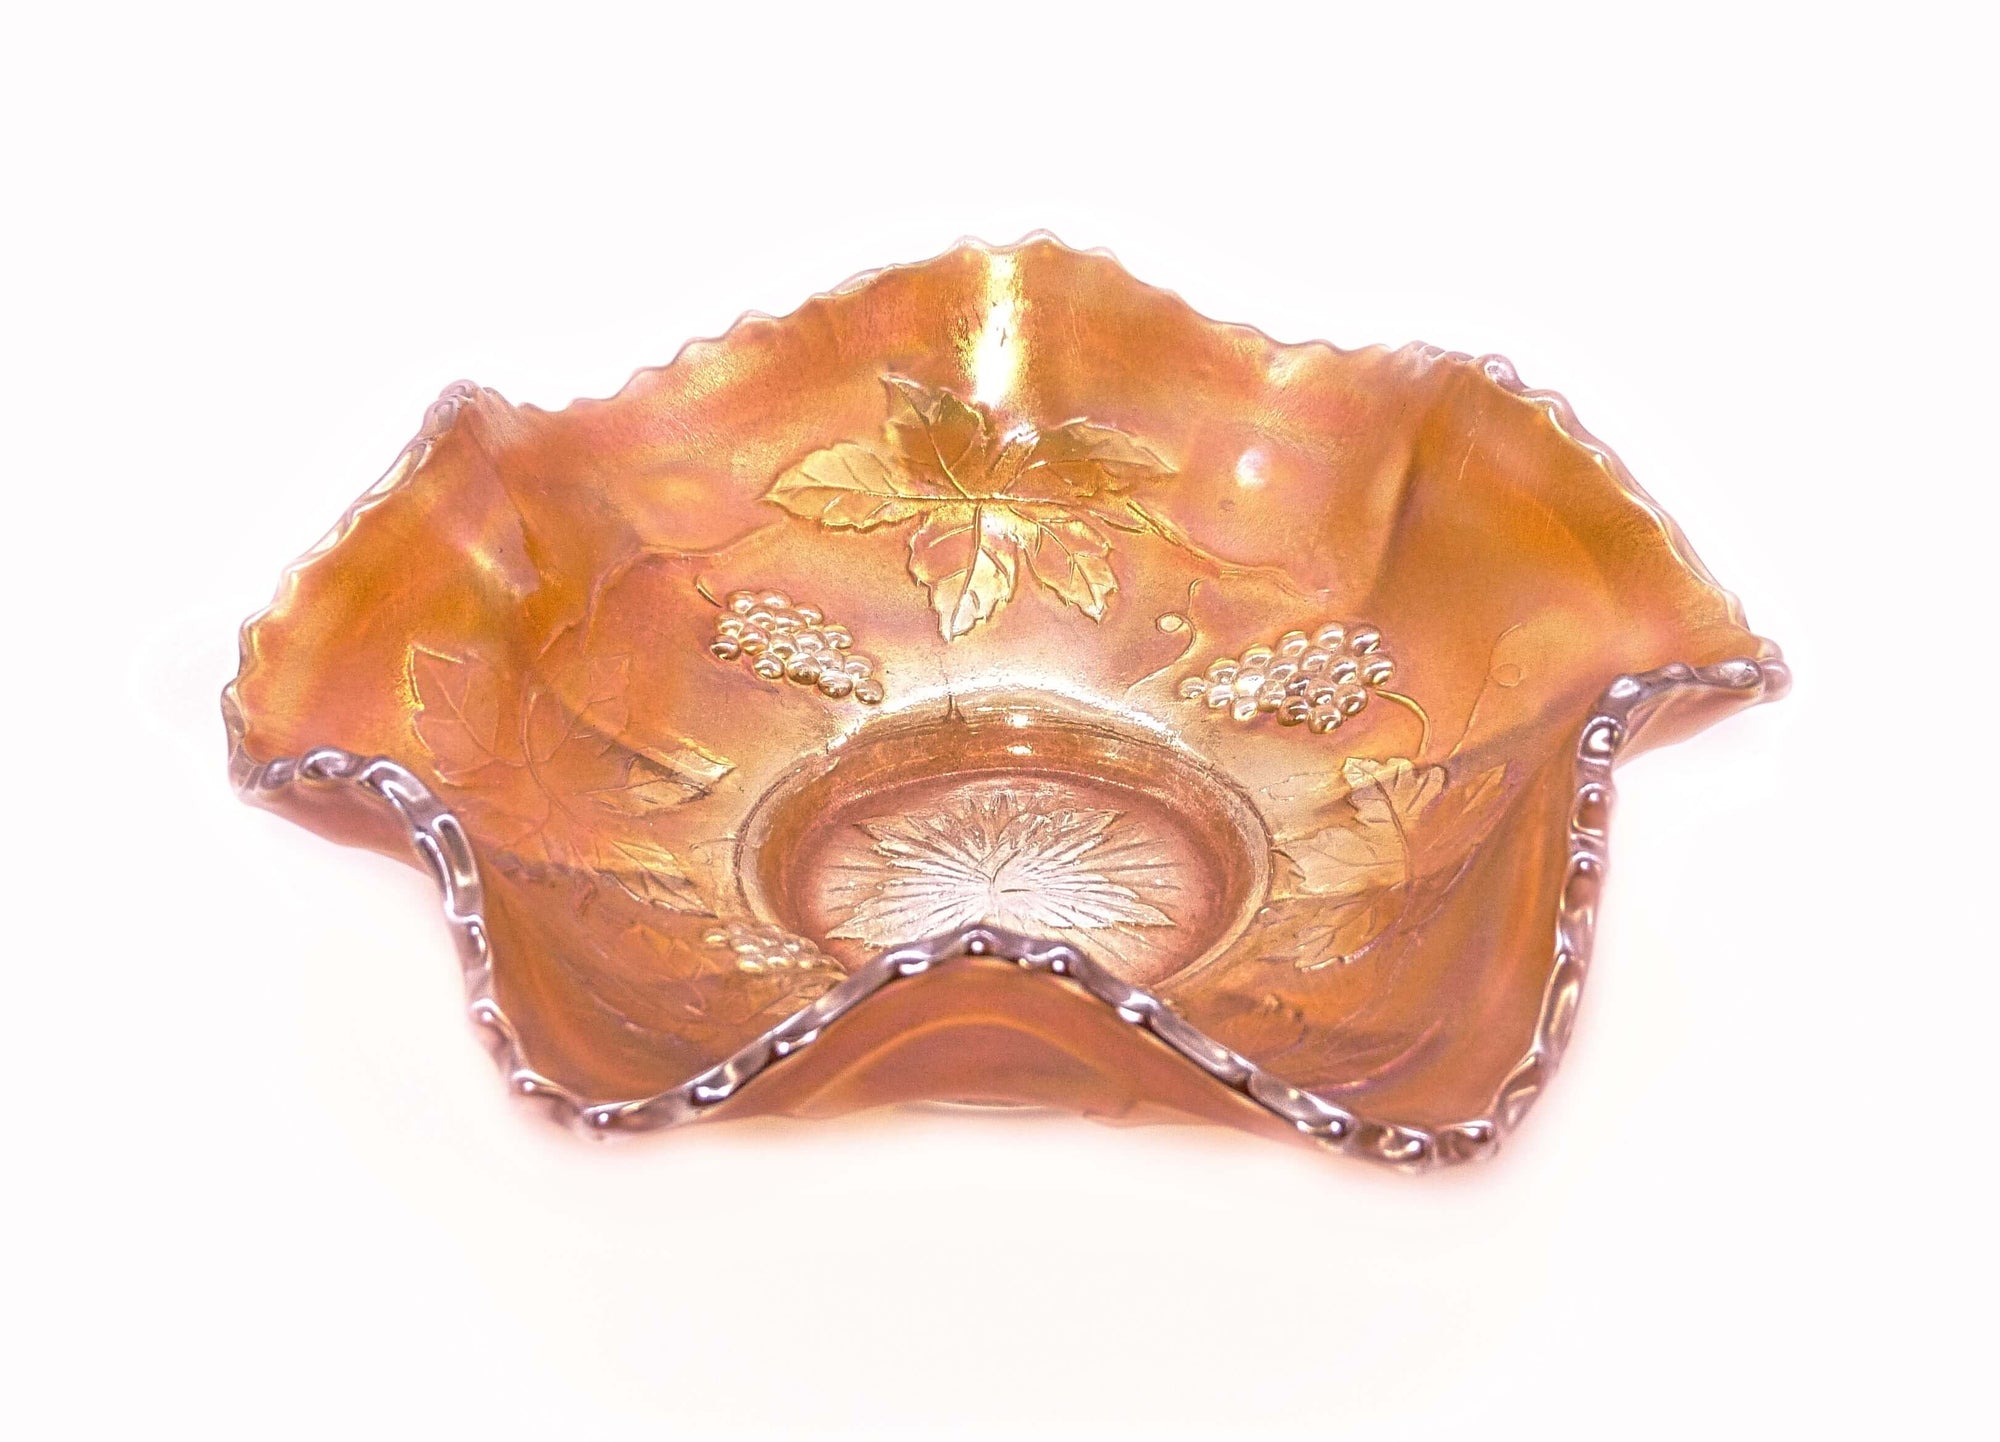 Carnival Glass Marigold Bowl, Fenton Grapes and Leaves Pattern, Very Pretty